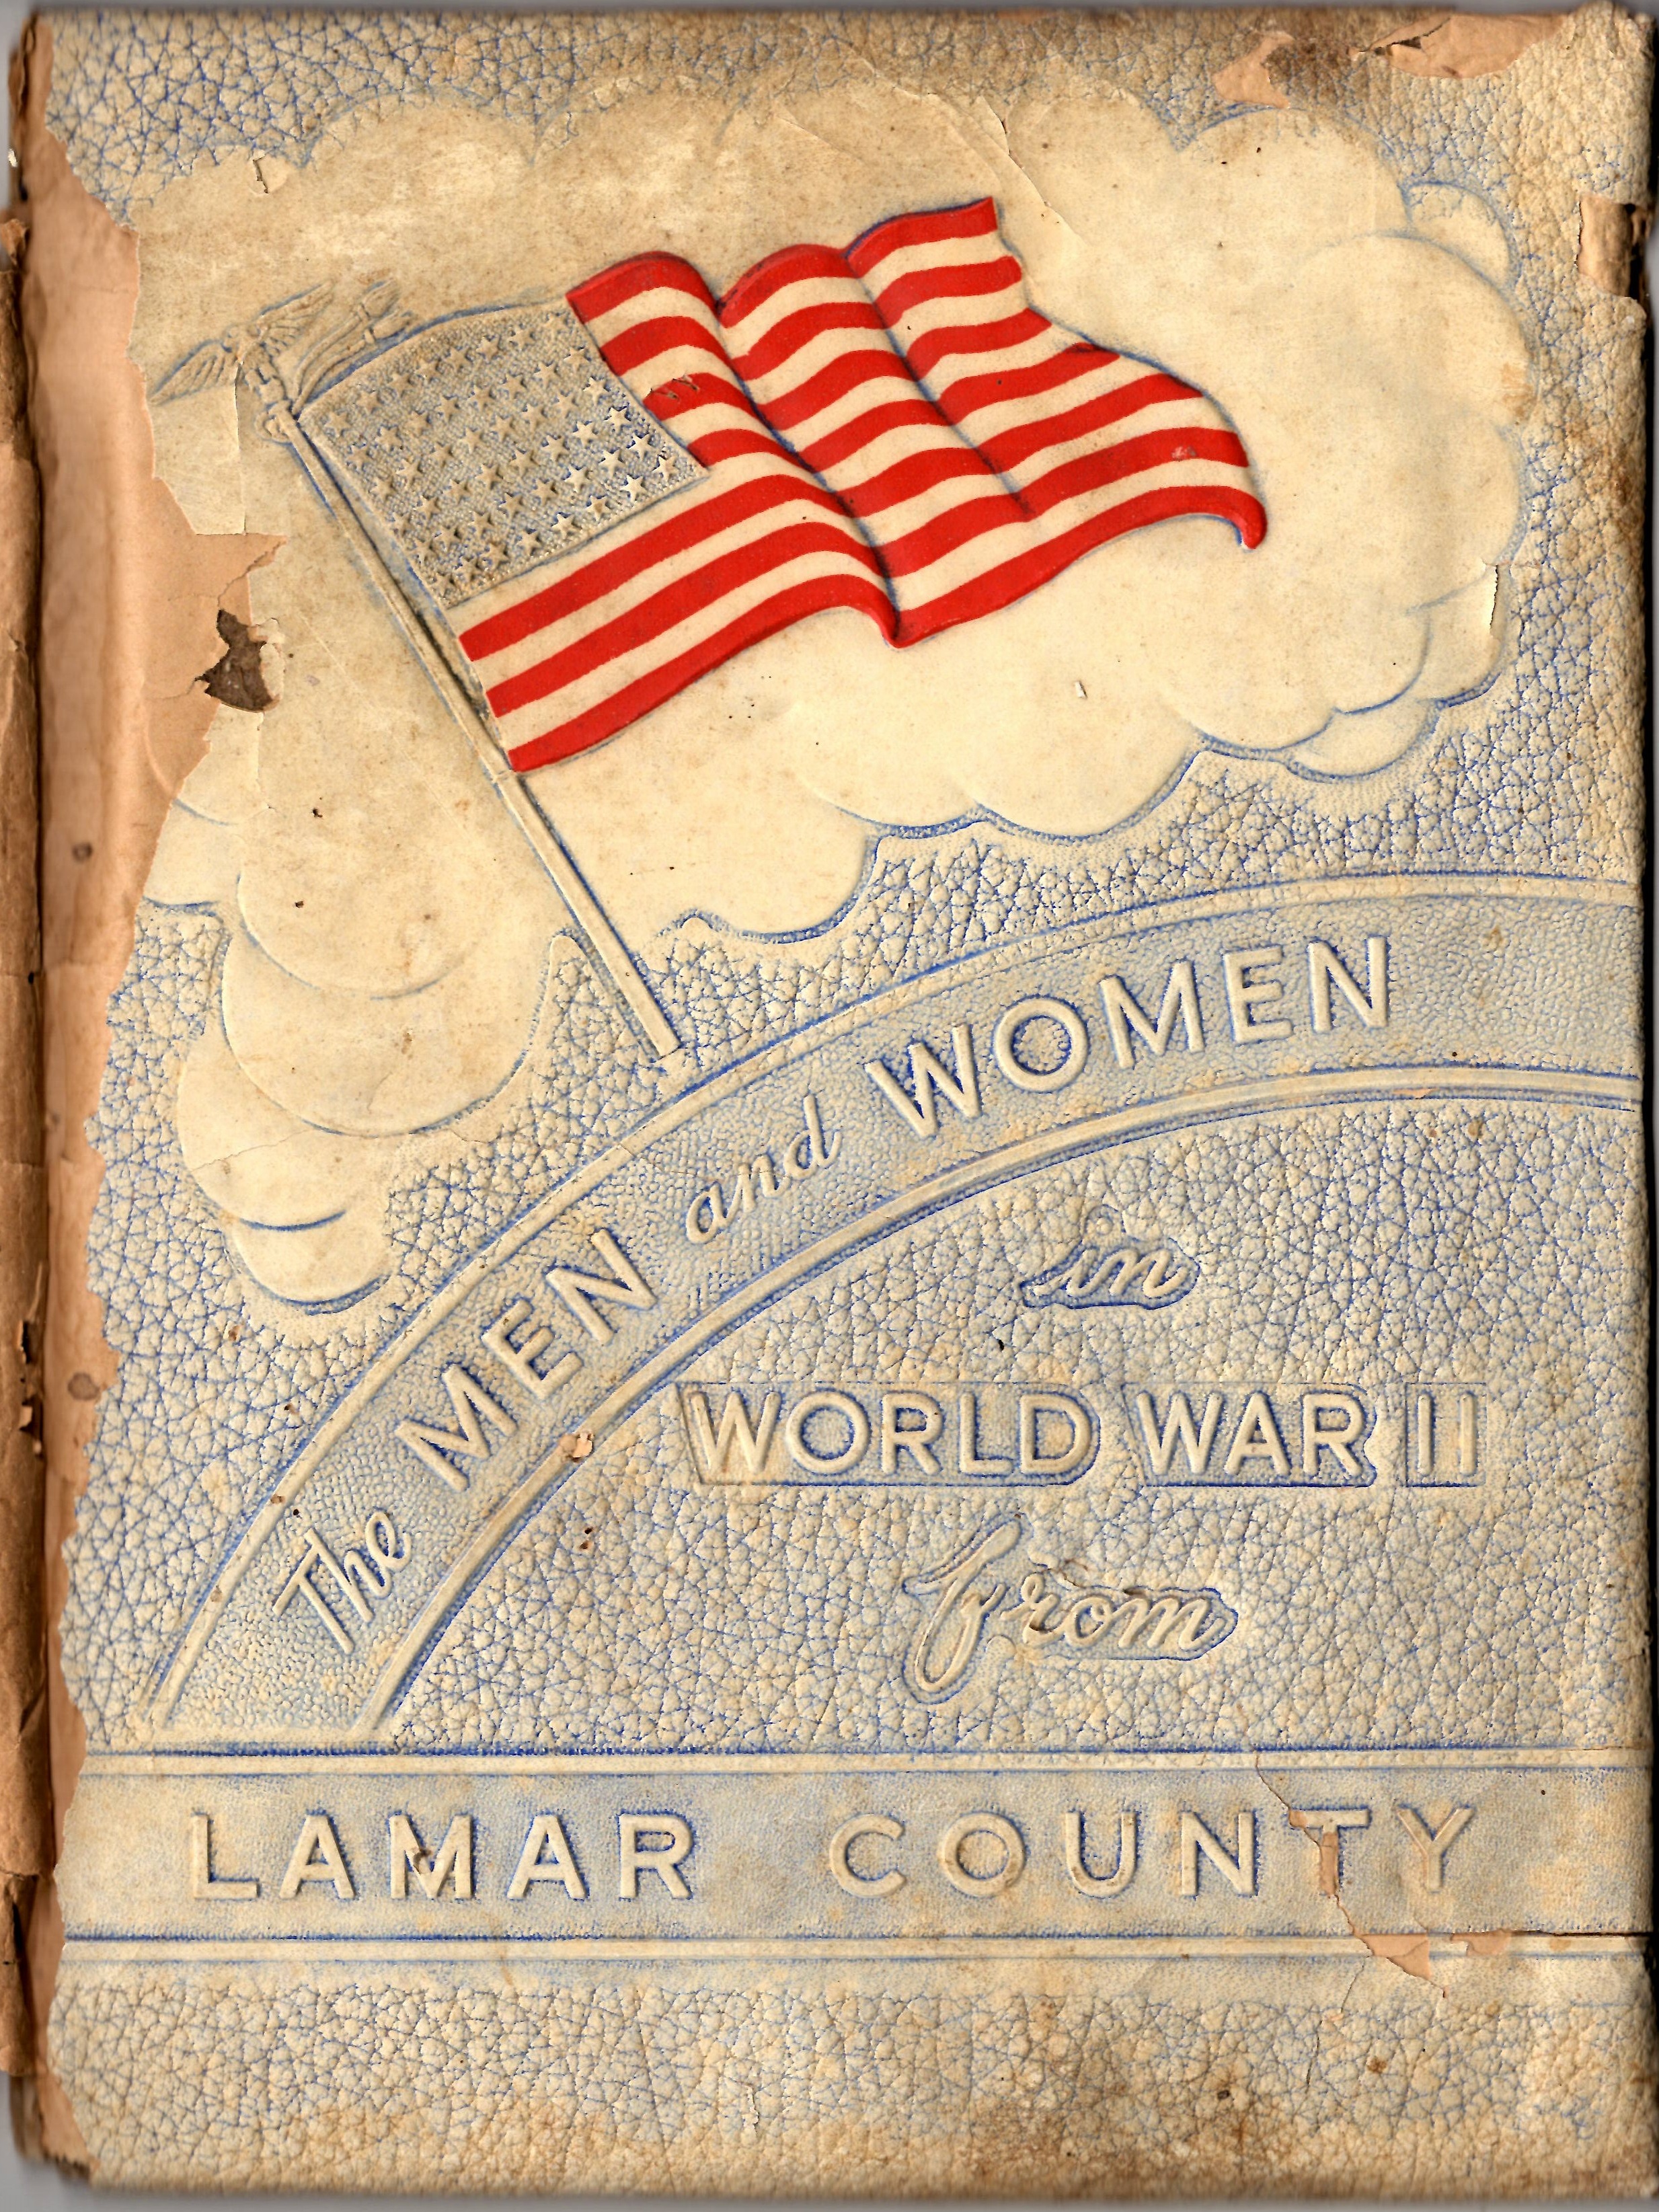 Men and women in the Armed Forces from Lamar County Texas WW2 WWII World War 